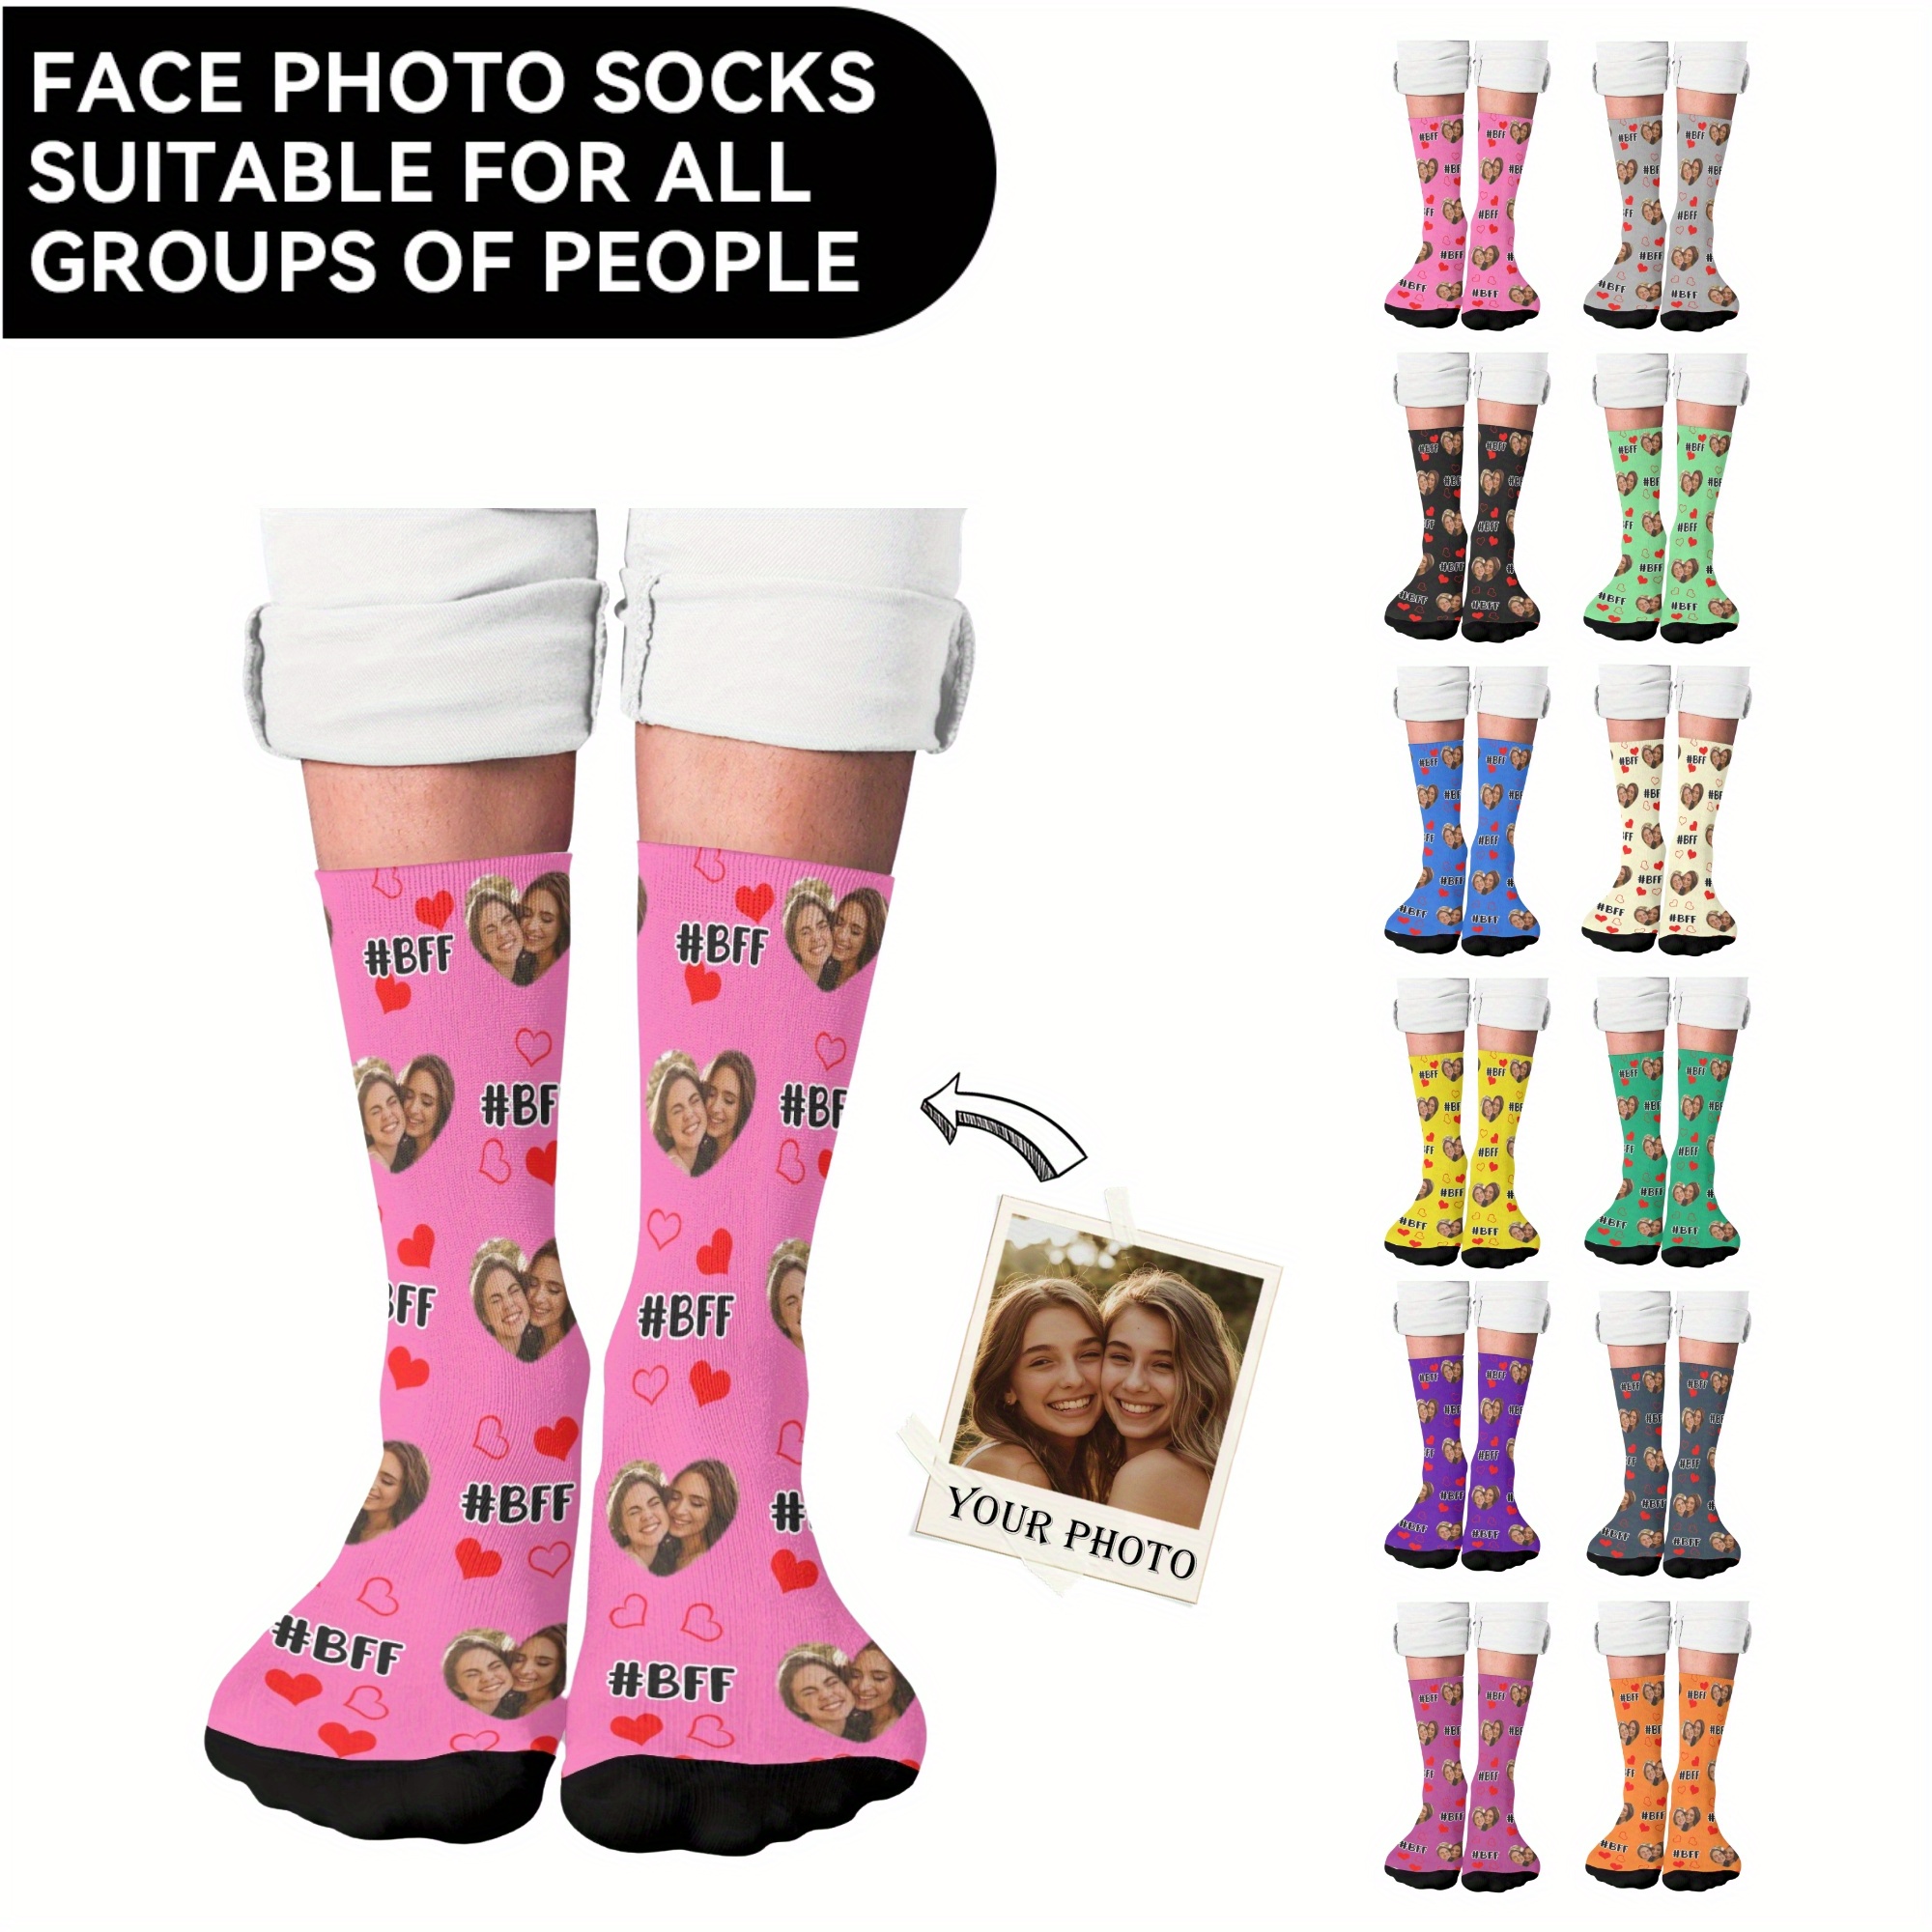 

Custom Face Socks, Personalized Funny Gift Crew Socks With Photo Customized, Bff(best Friend Forever) Themed, Novelty Trendy Party Present Socks For Men Women